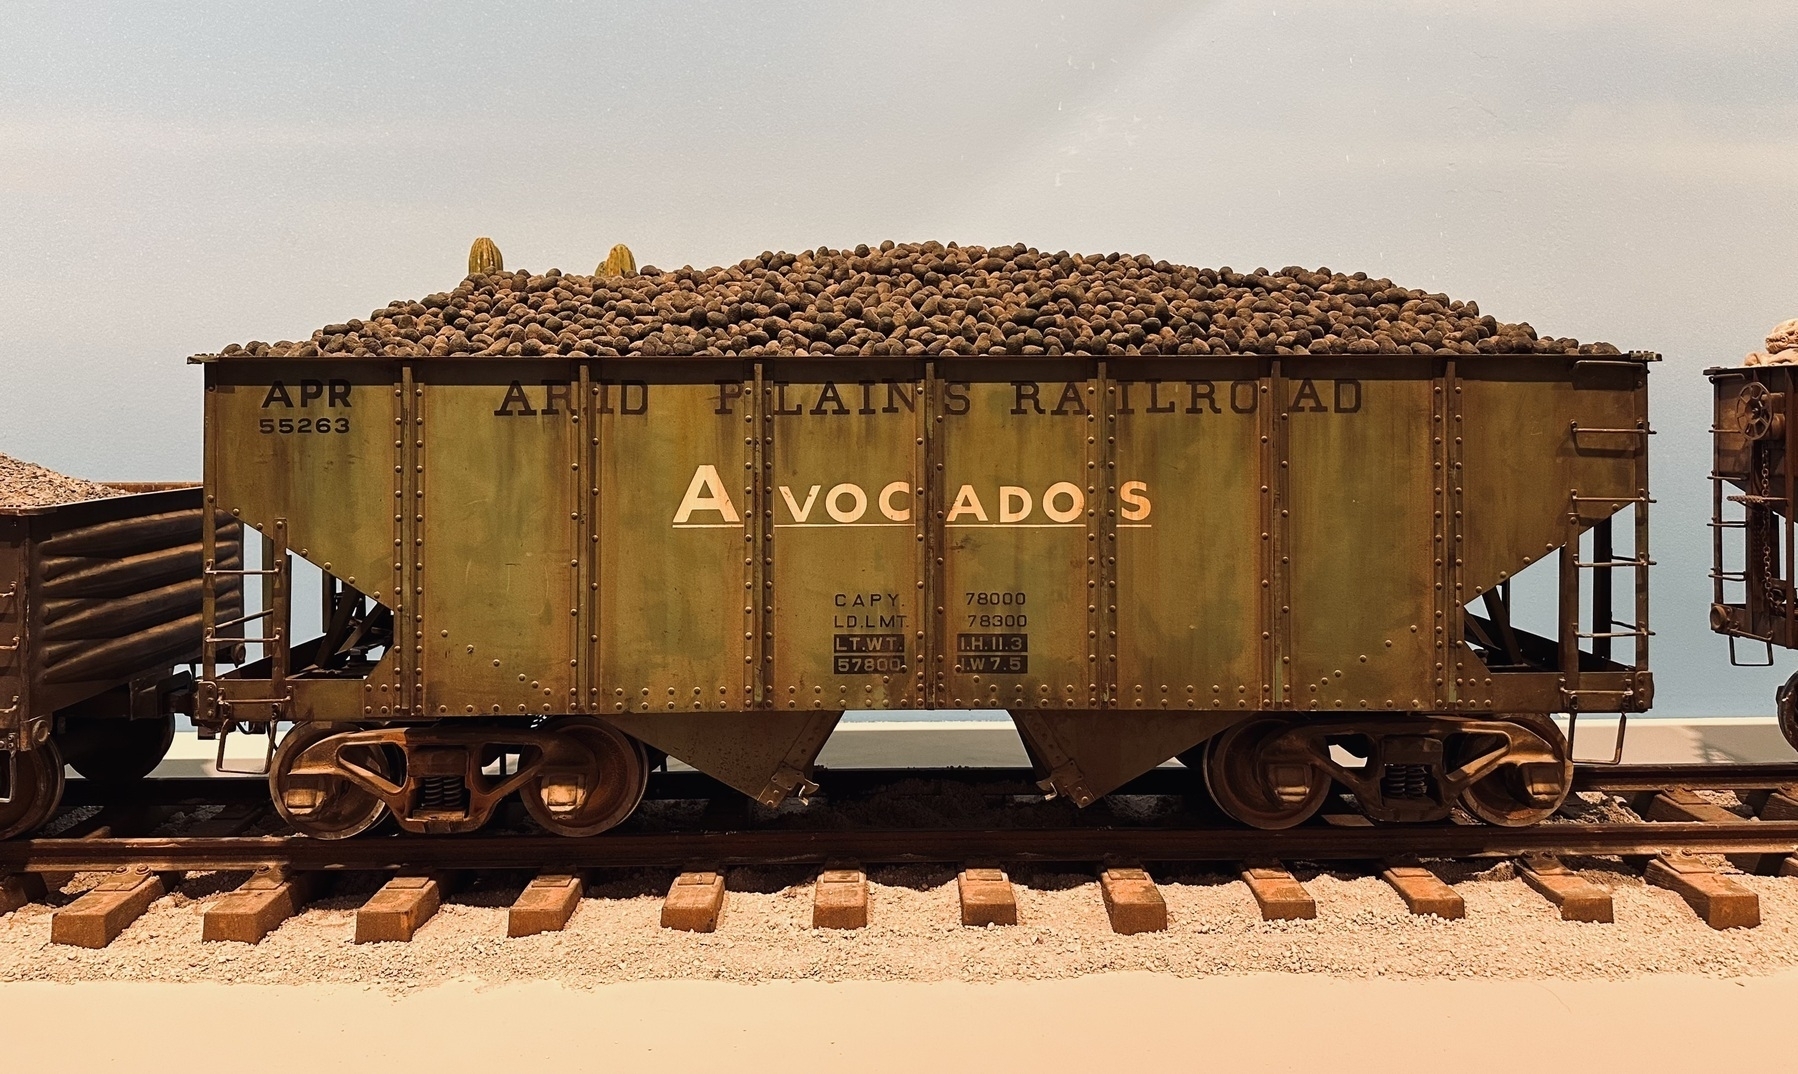 A model train wagon carrying avocados. Owned by the fictional Arid Plains Railroad.